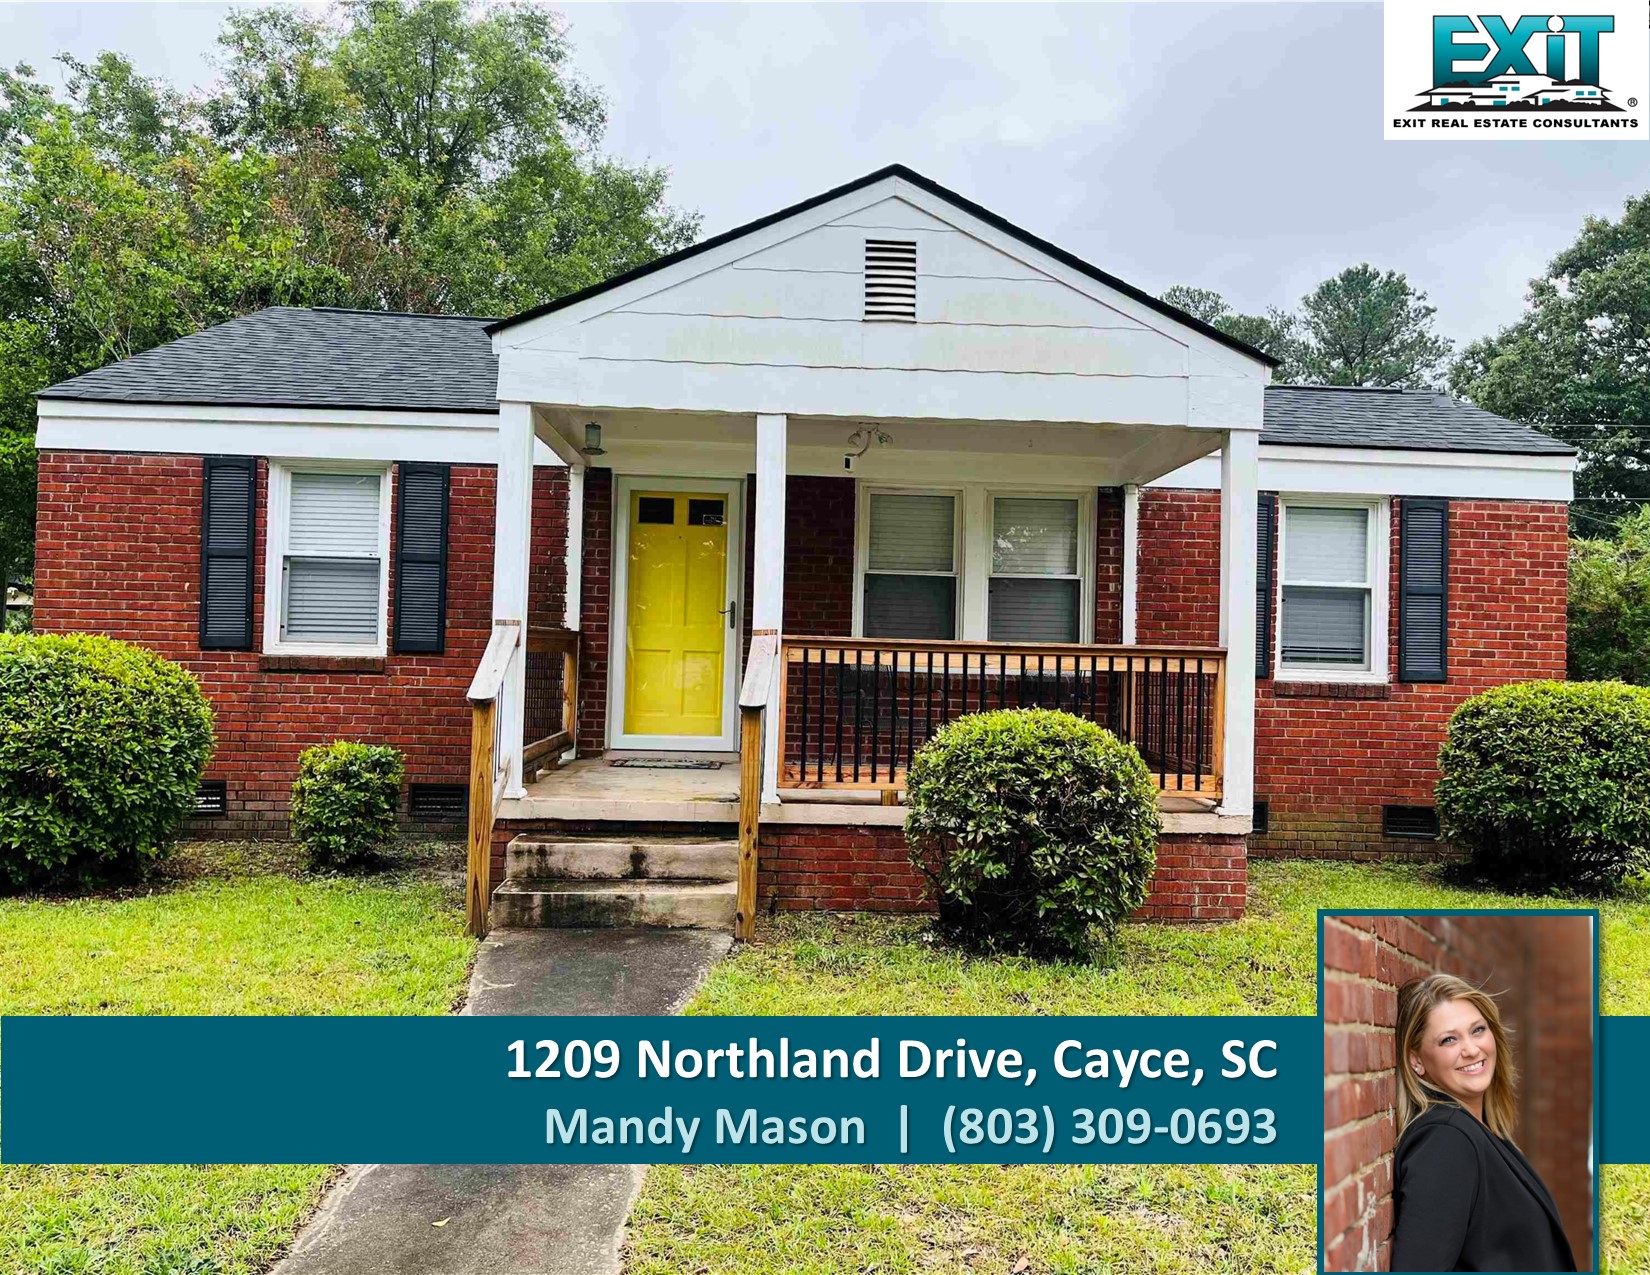 Just listed in Broad Acres - Cayce